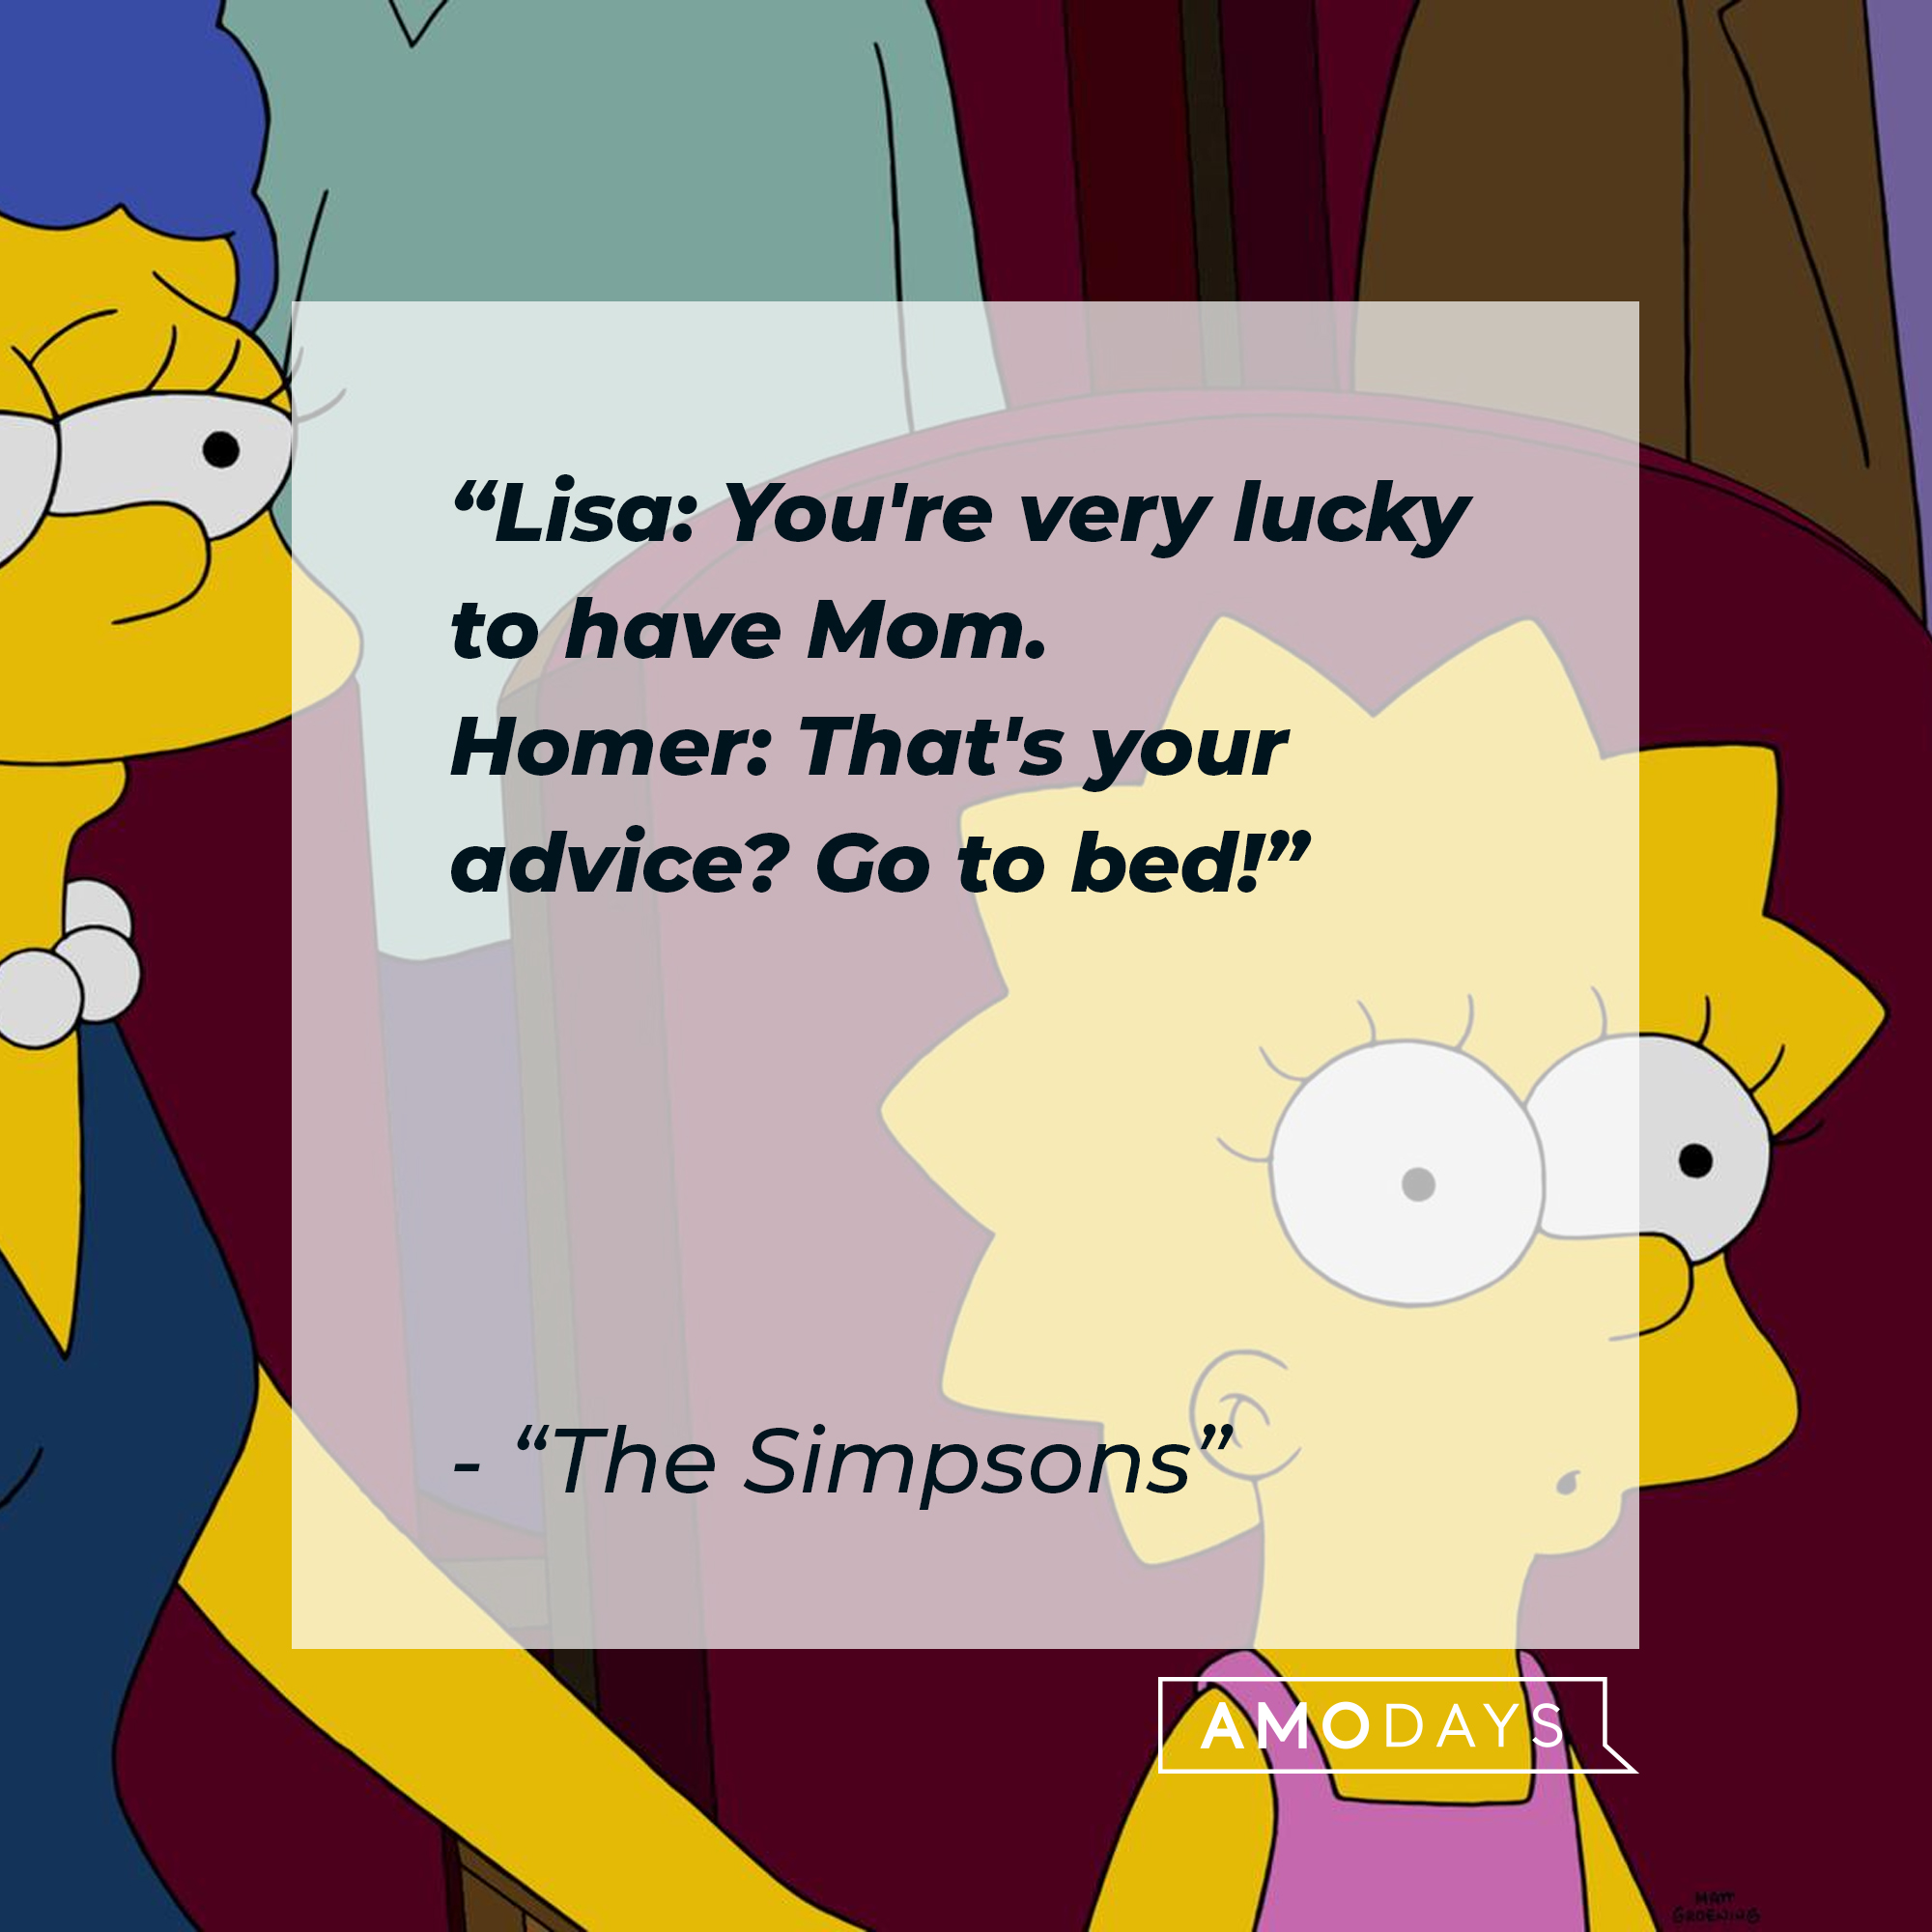 Lisa Simpson with her dialogue: "Lisa: You're very lucky to have Mom. ; Homer: That's your advice? Go to bed!" | Source: Facebook.com/TheSimpsons